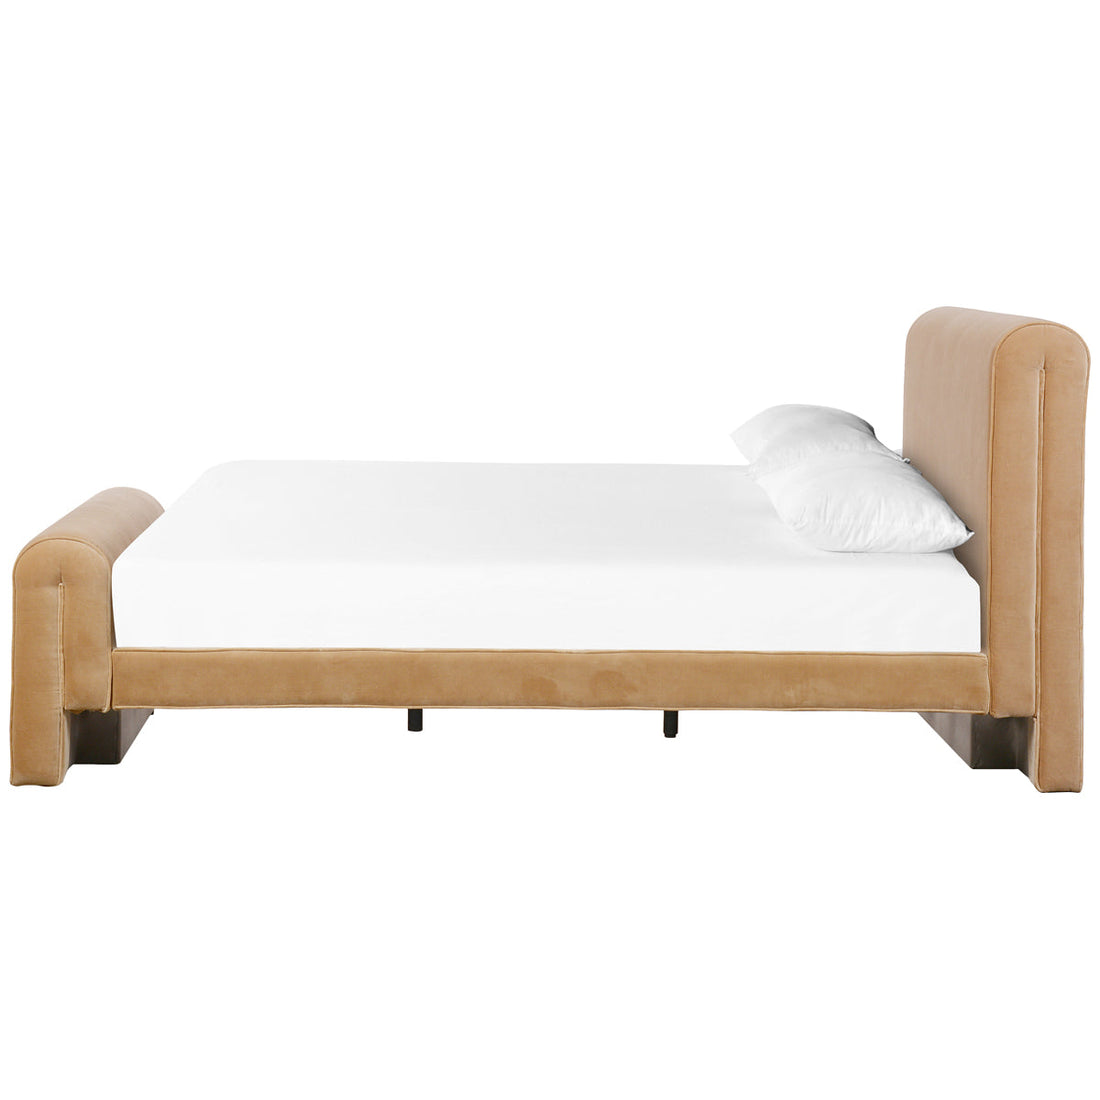 Four Hands Norwood Mitchell Bed - Surrey Camel